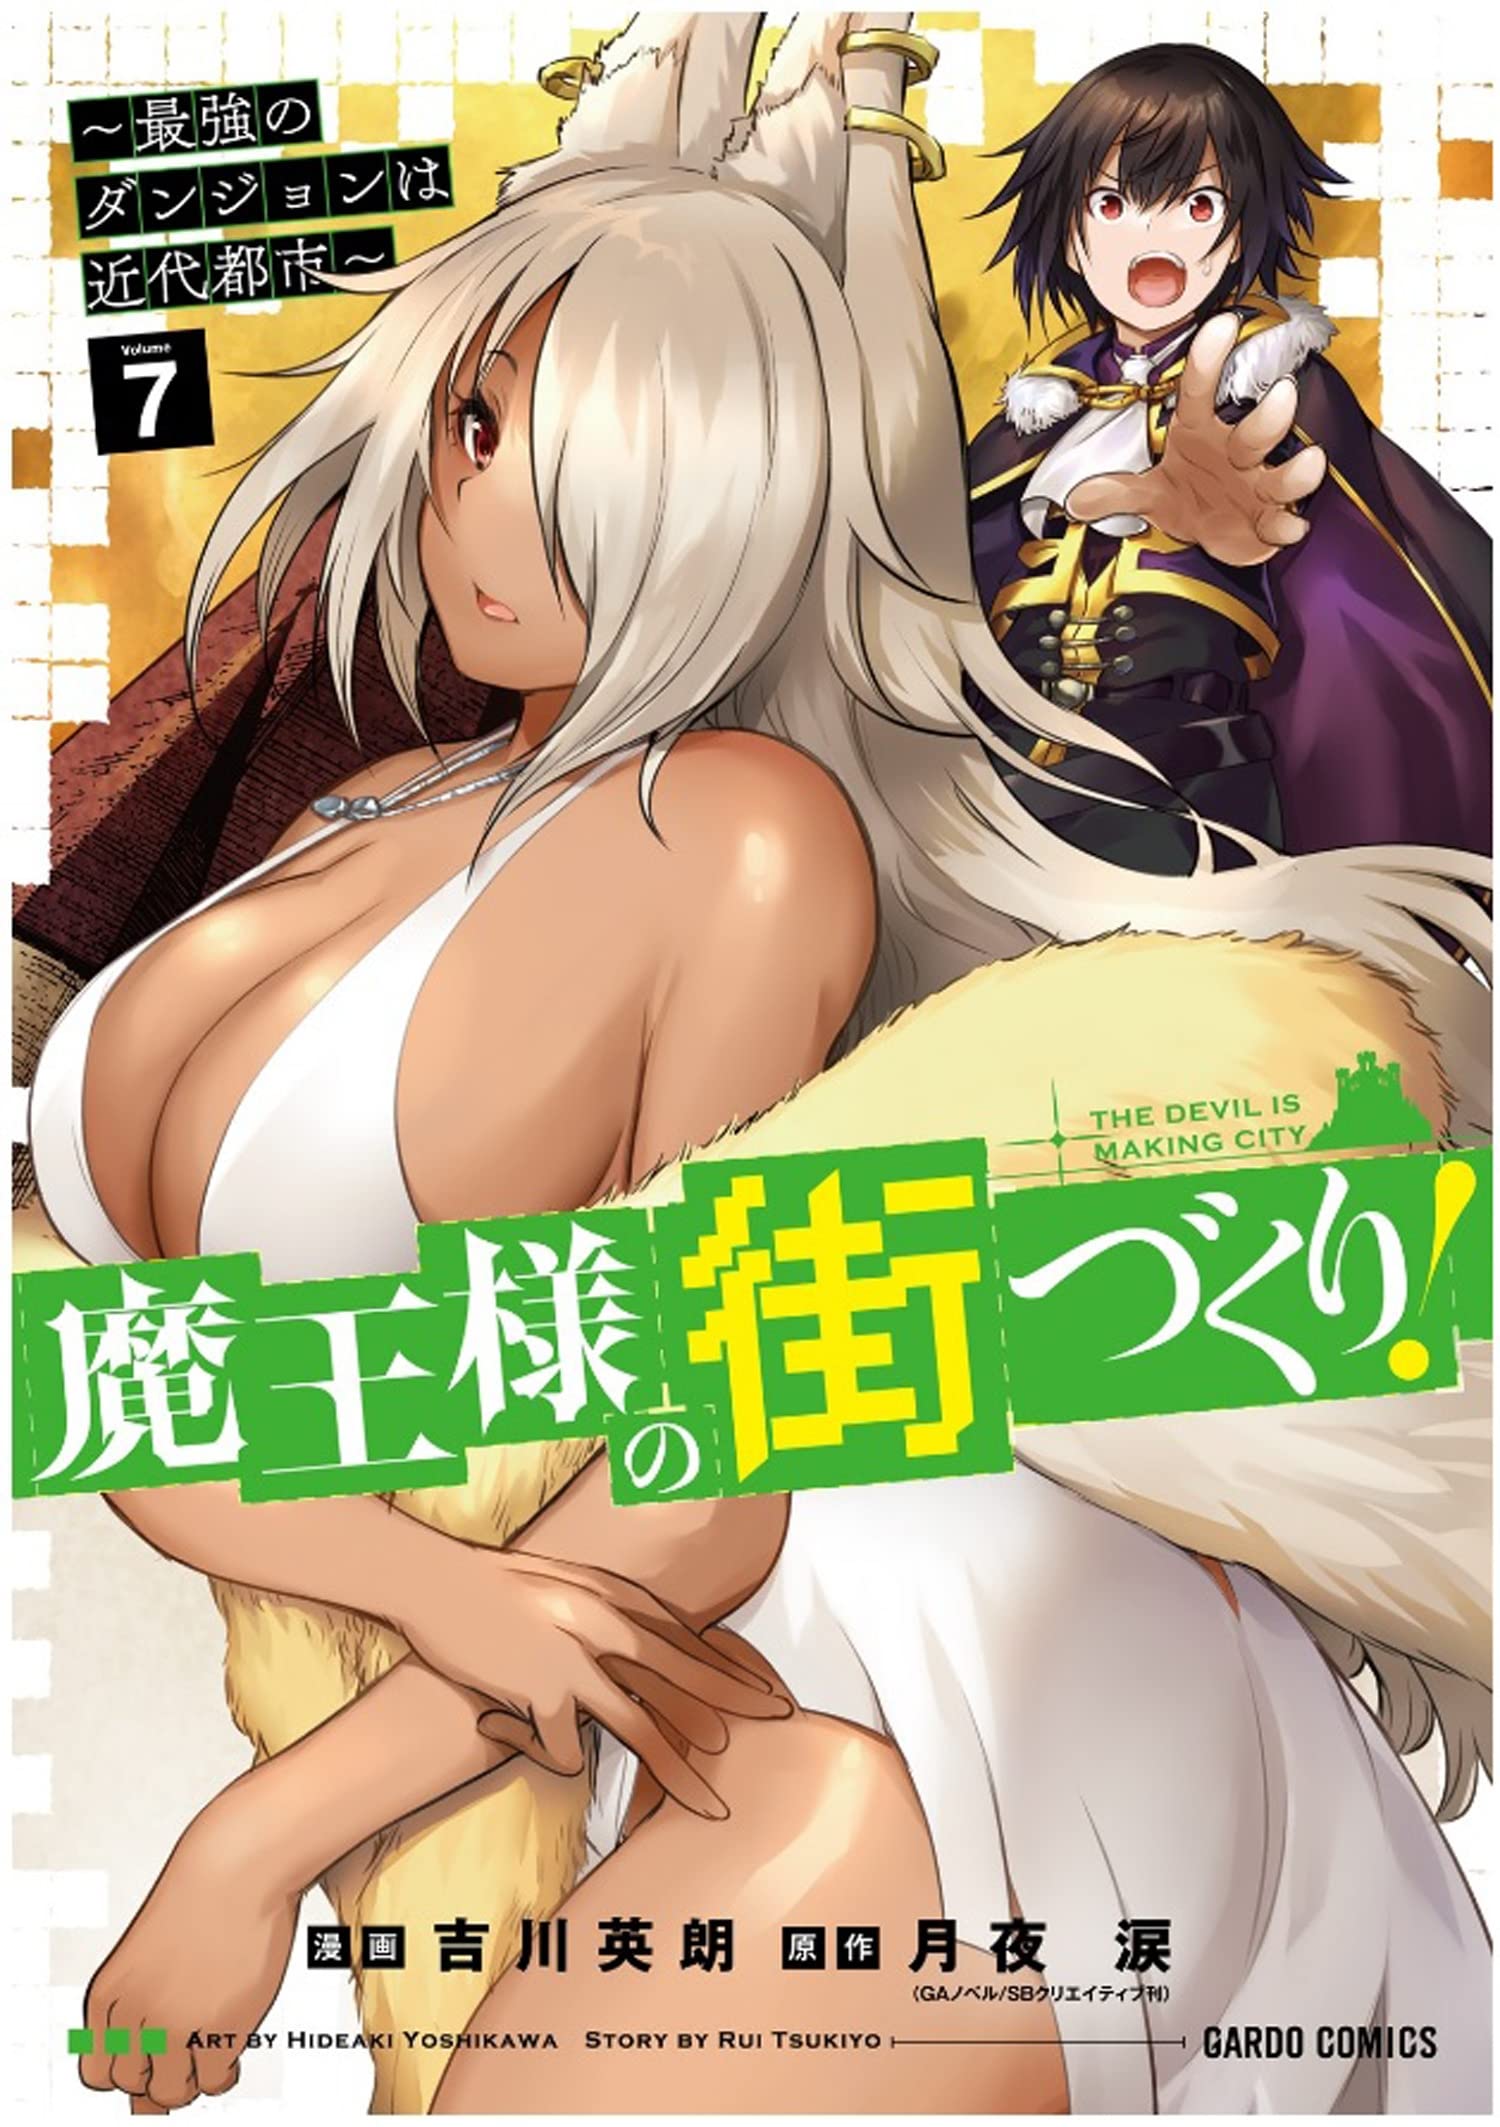 Dungeon Builder: The Demon King's Labyrinth Is a Modern City! (Manga) Vol. 07